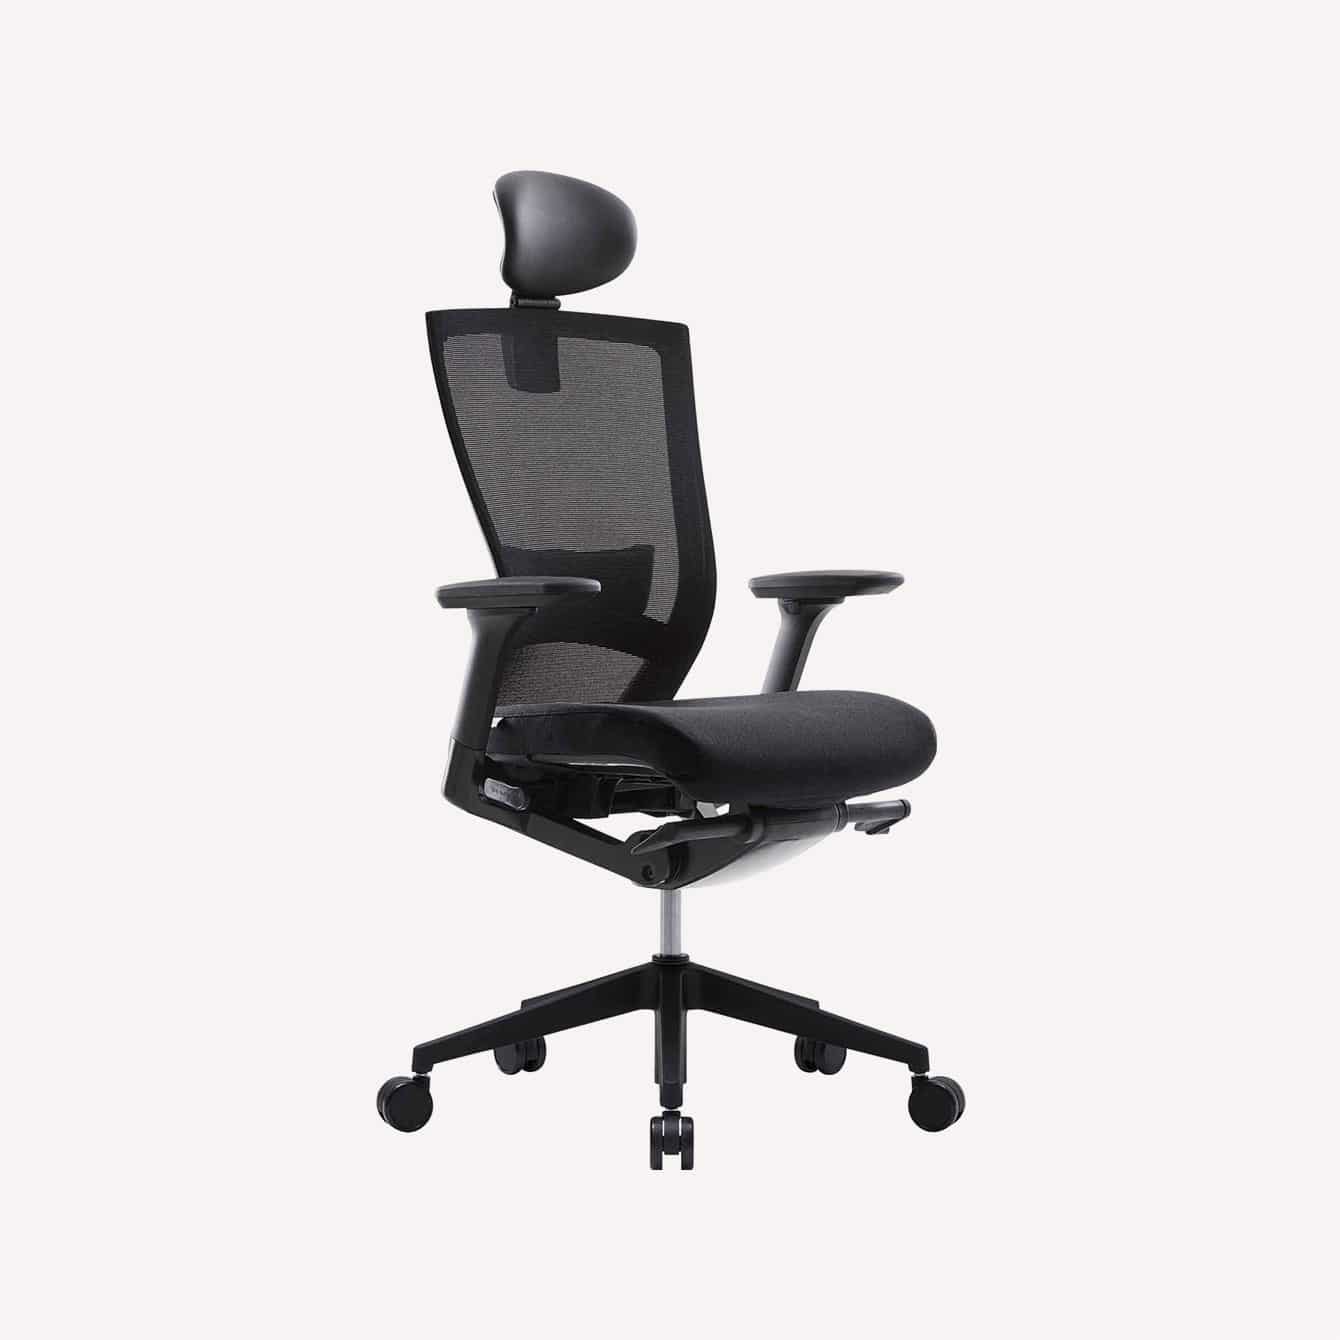 How to Pick an Office Chair for Short People (Watch This Before